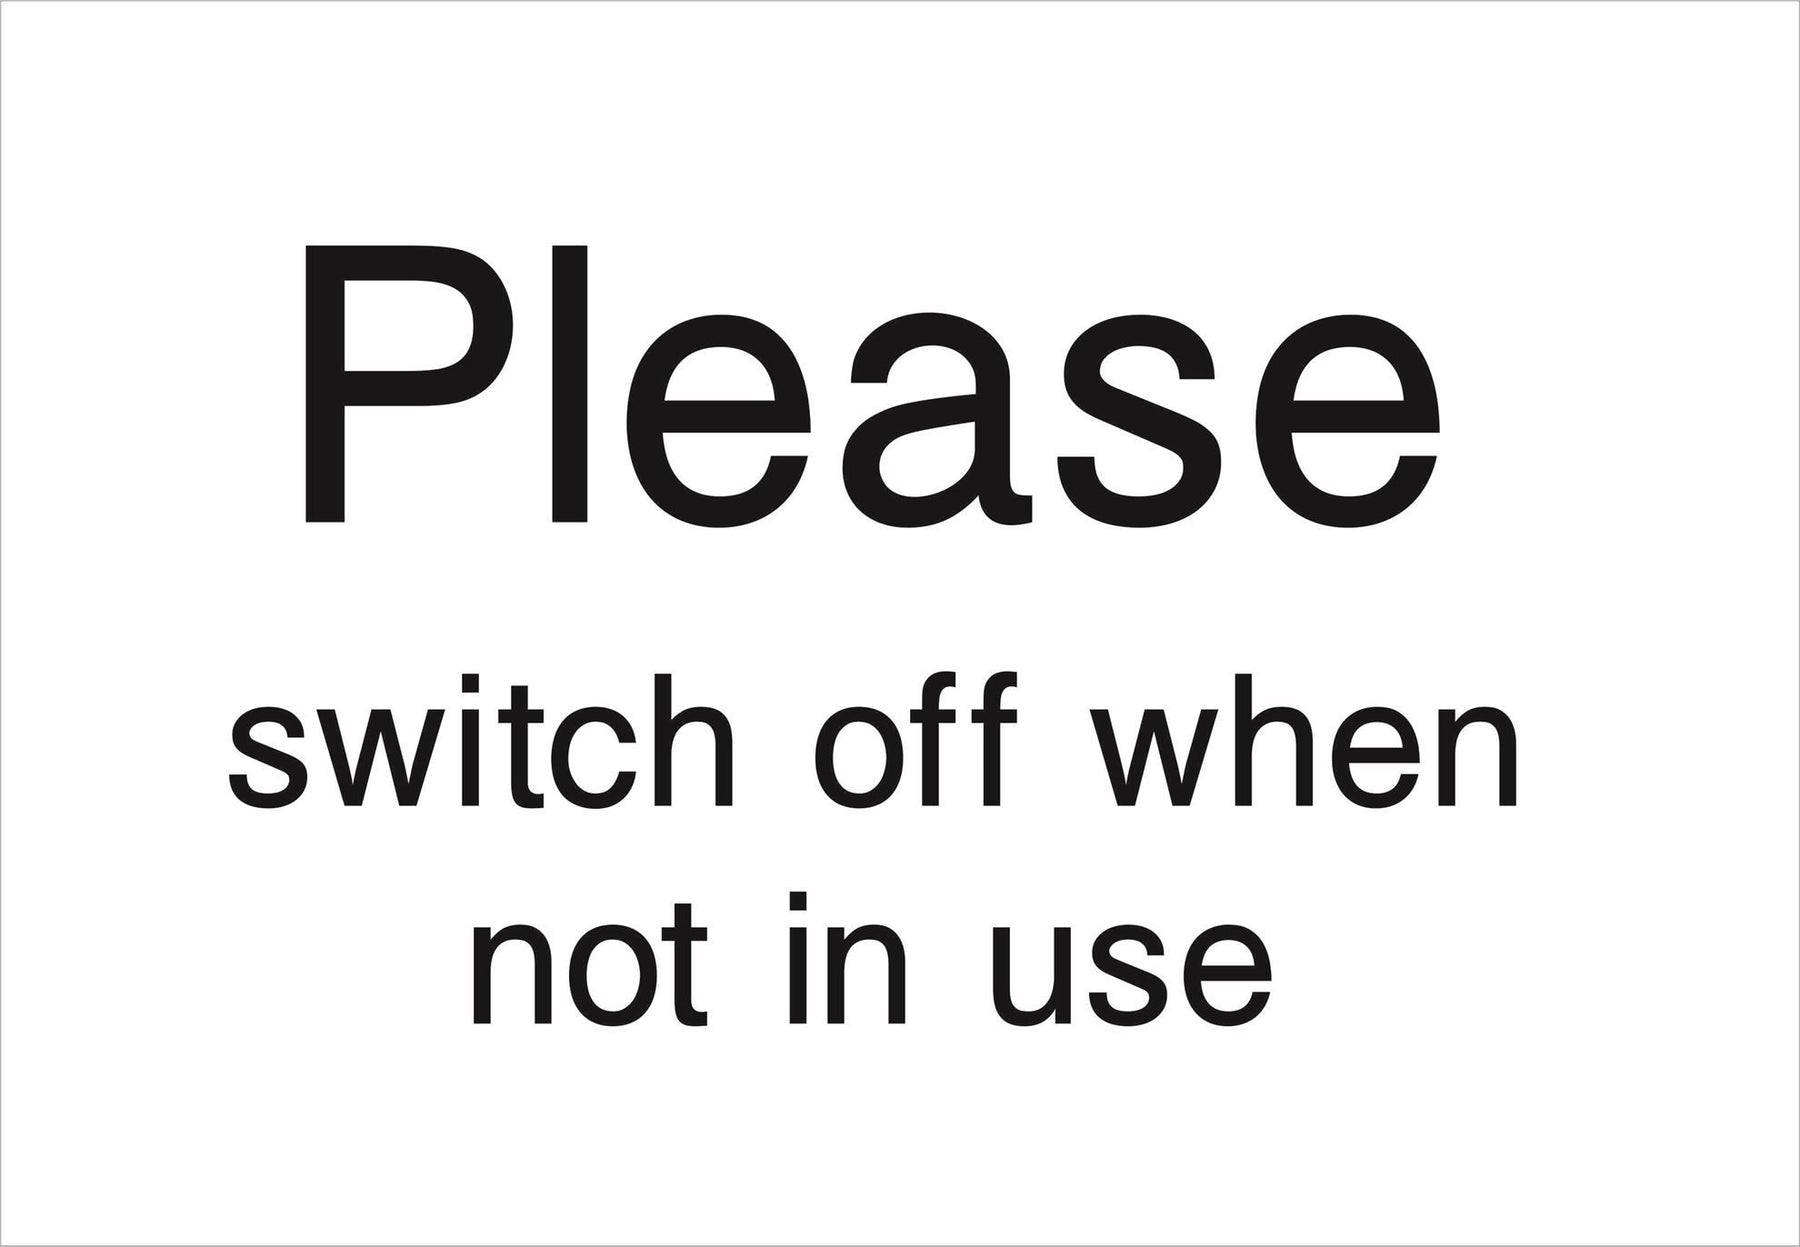 Please switch off when not in use